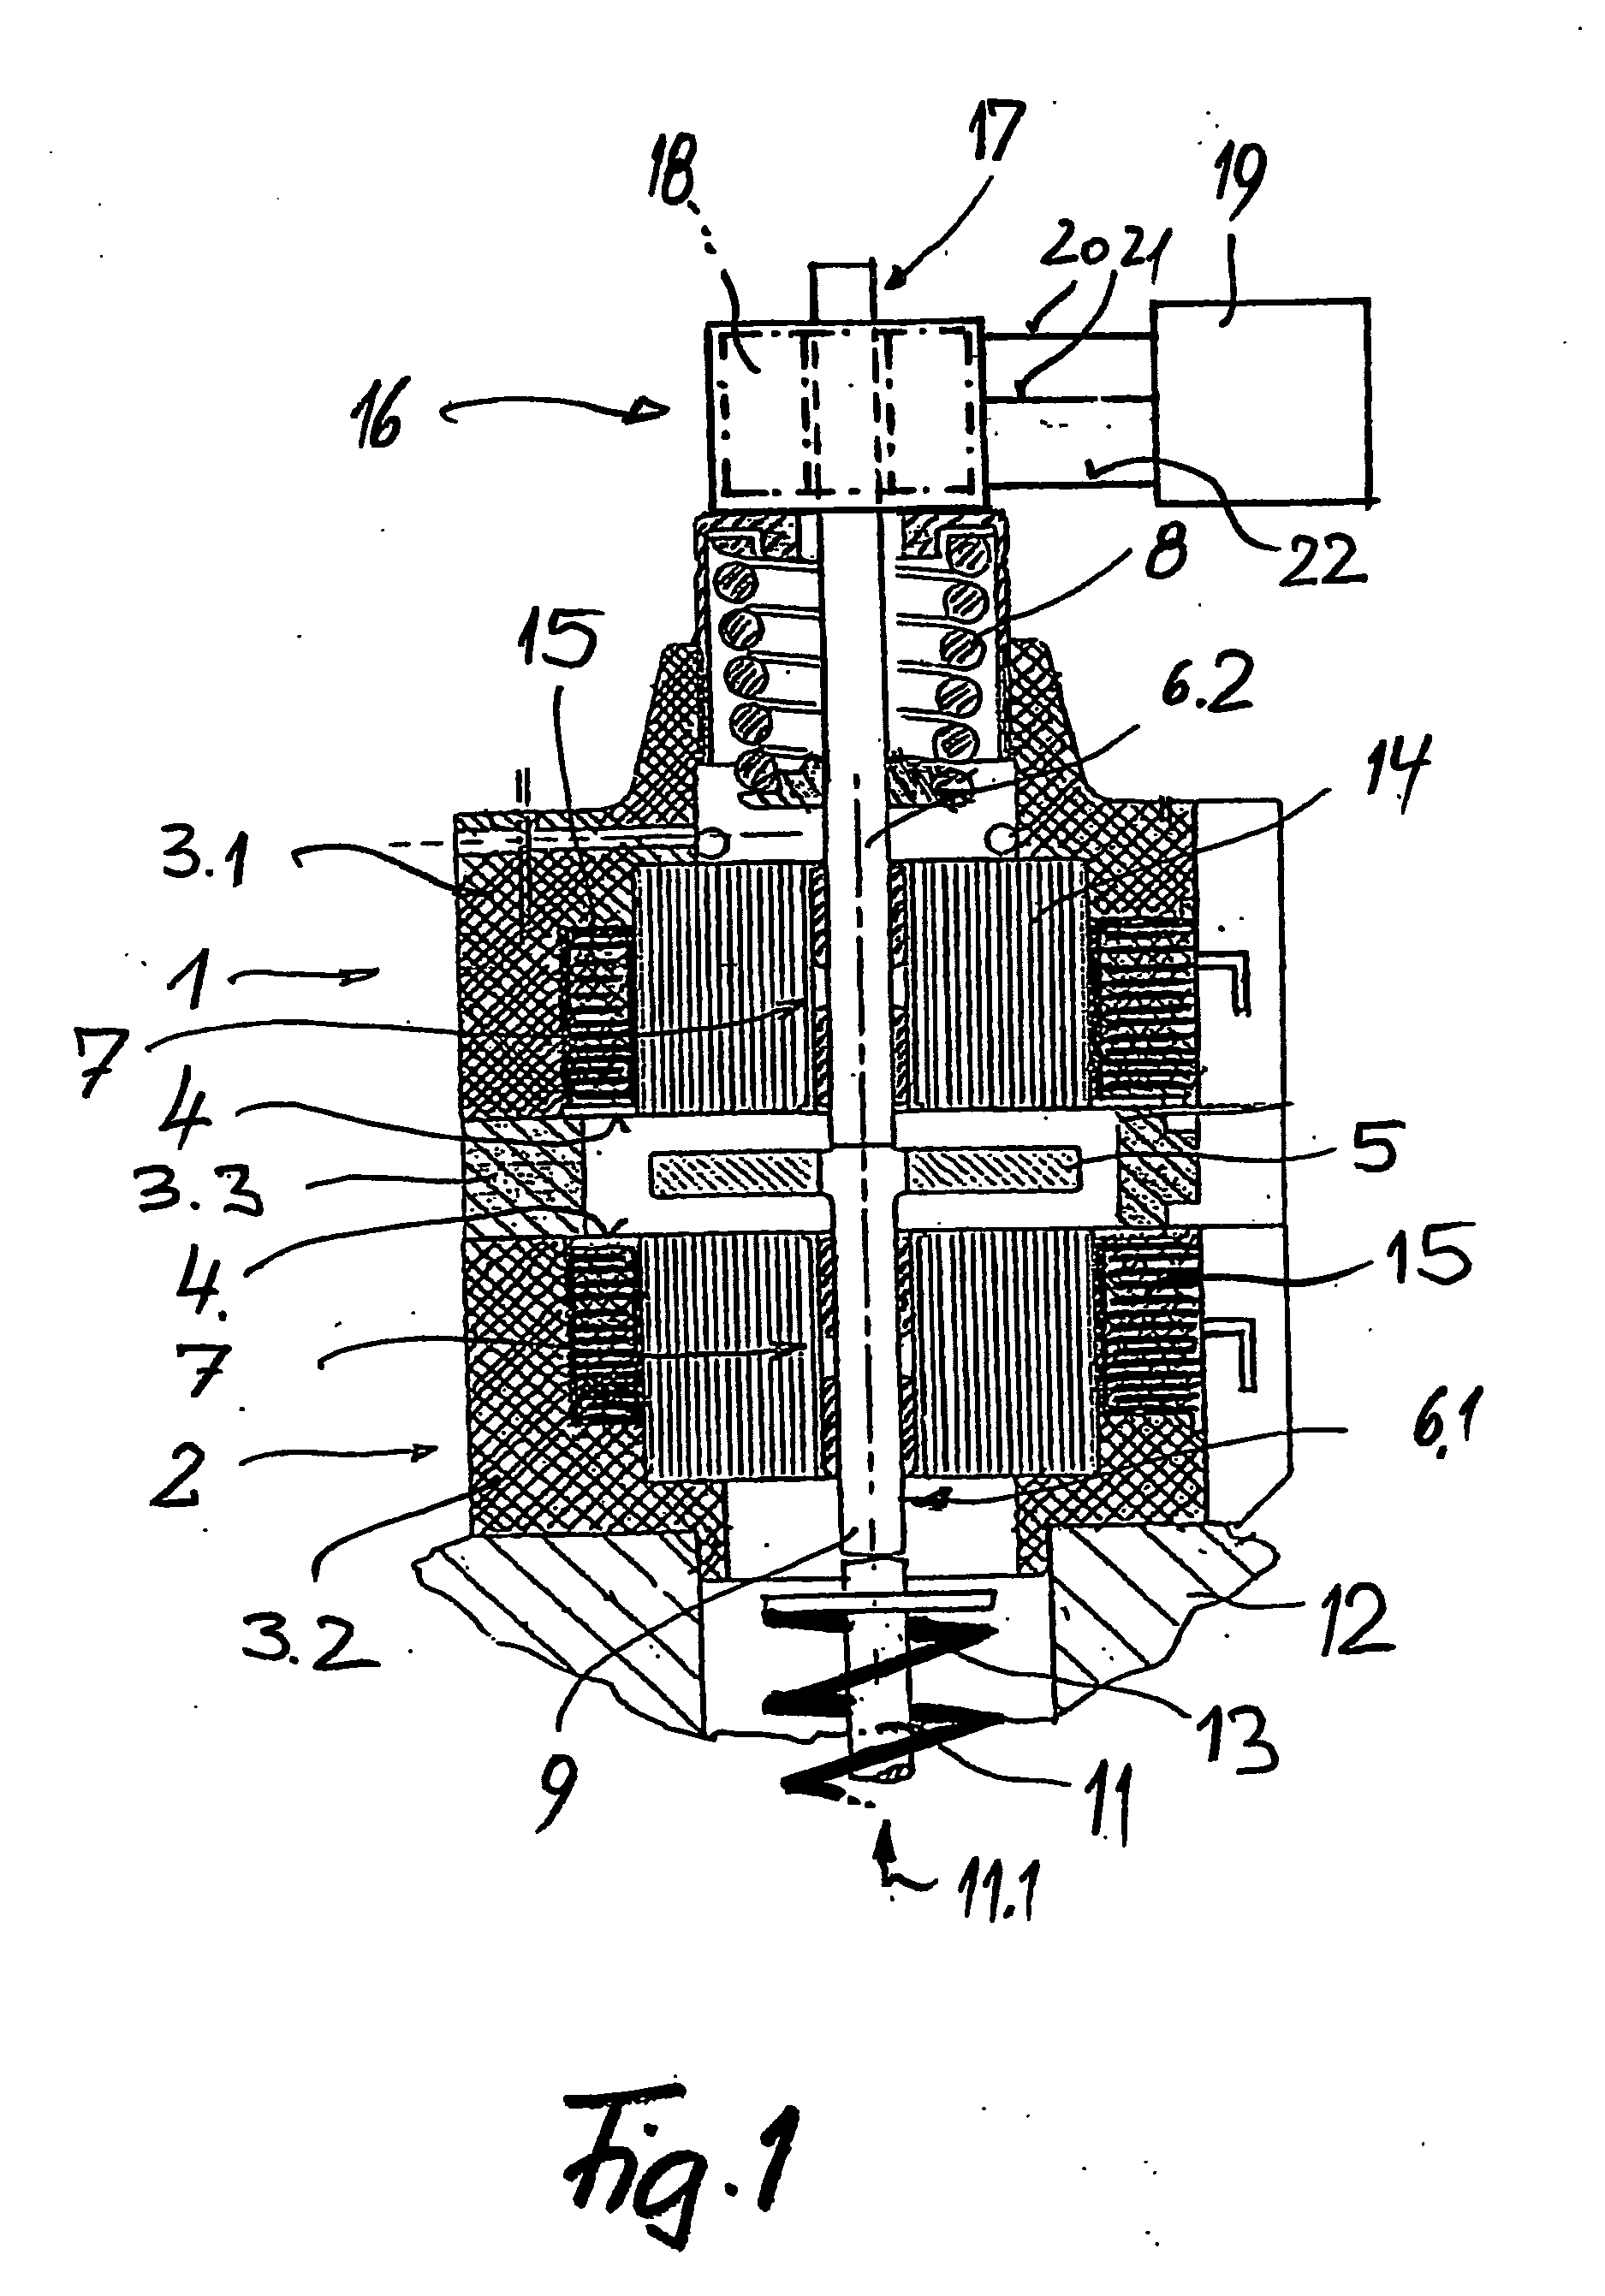 Sensor array for detecting the movement of a positioning element moved back and forth using an actuator